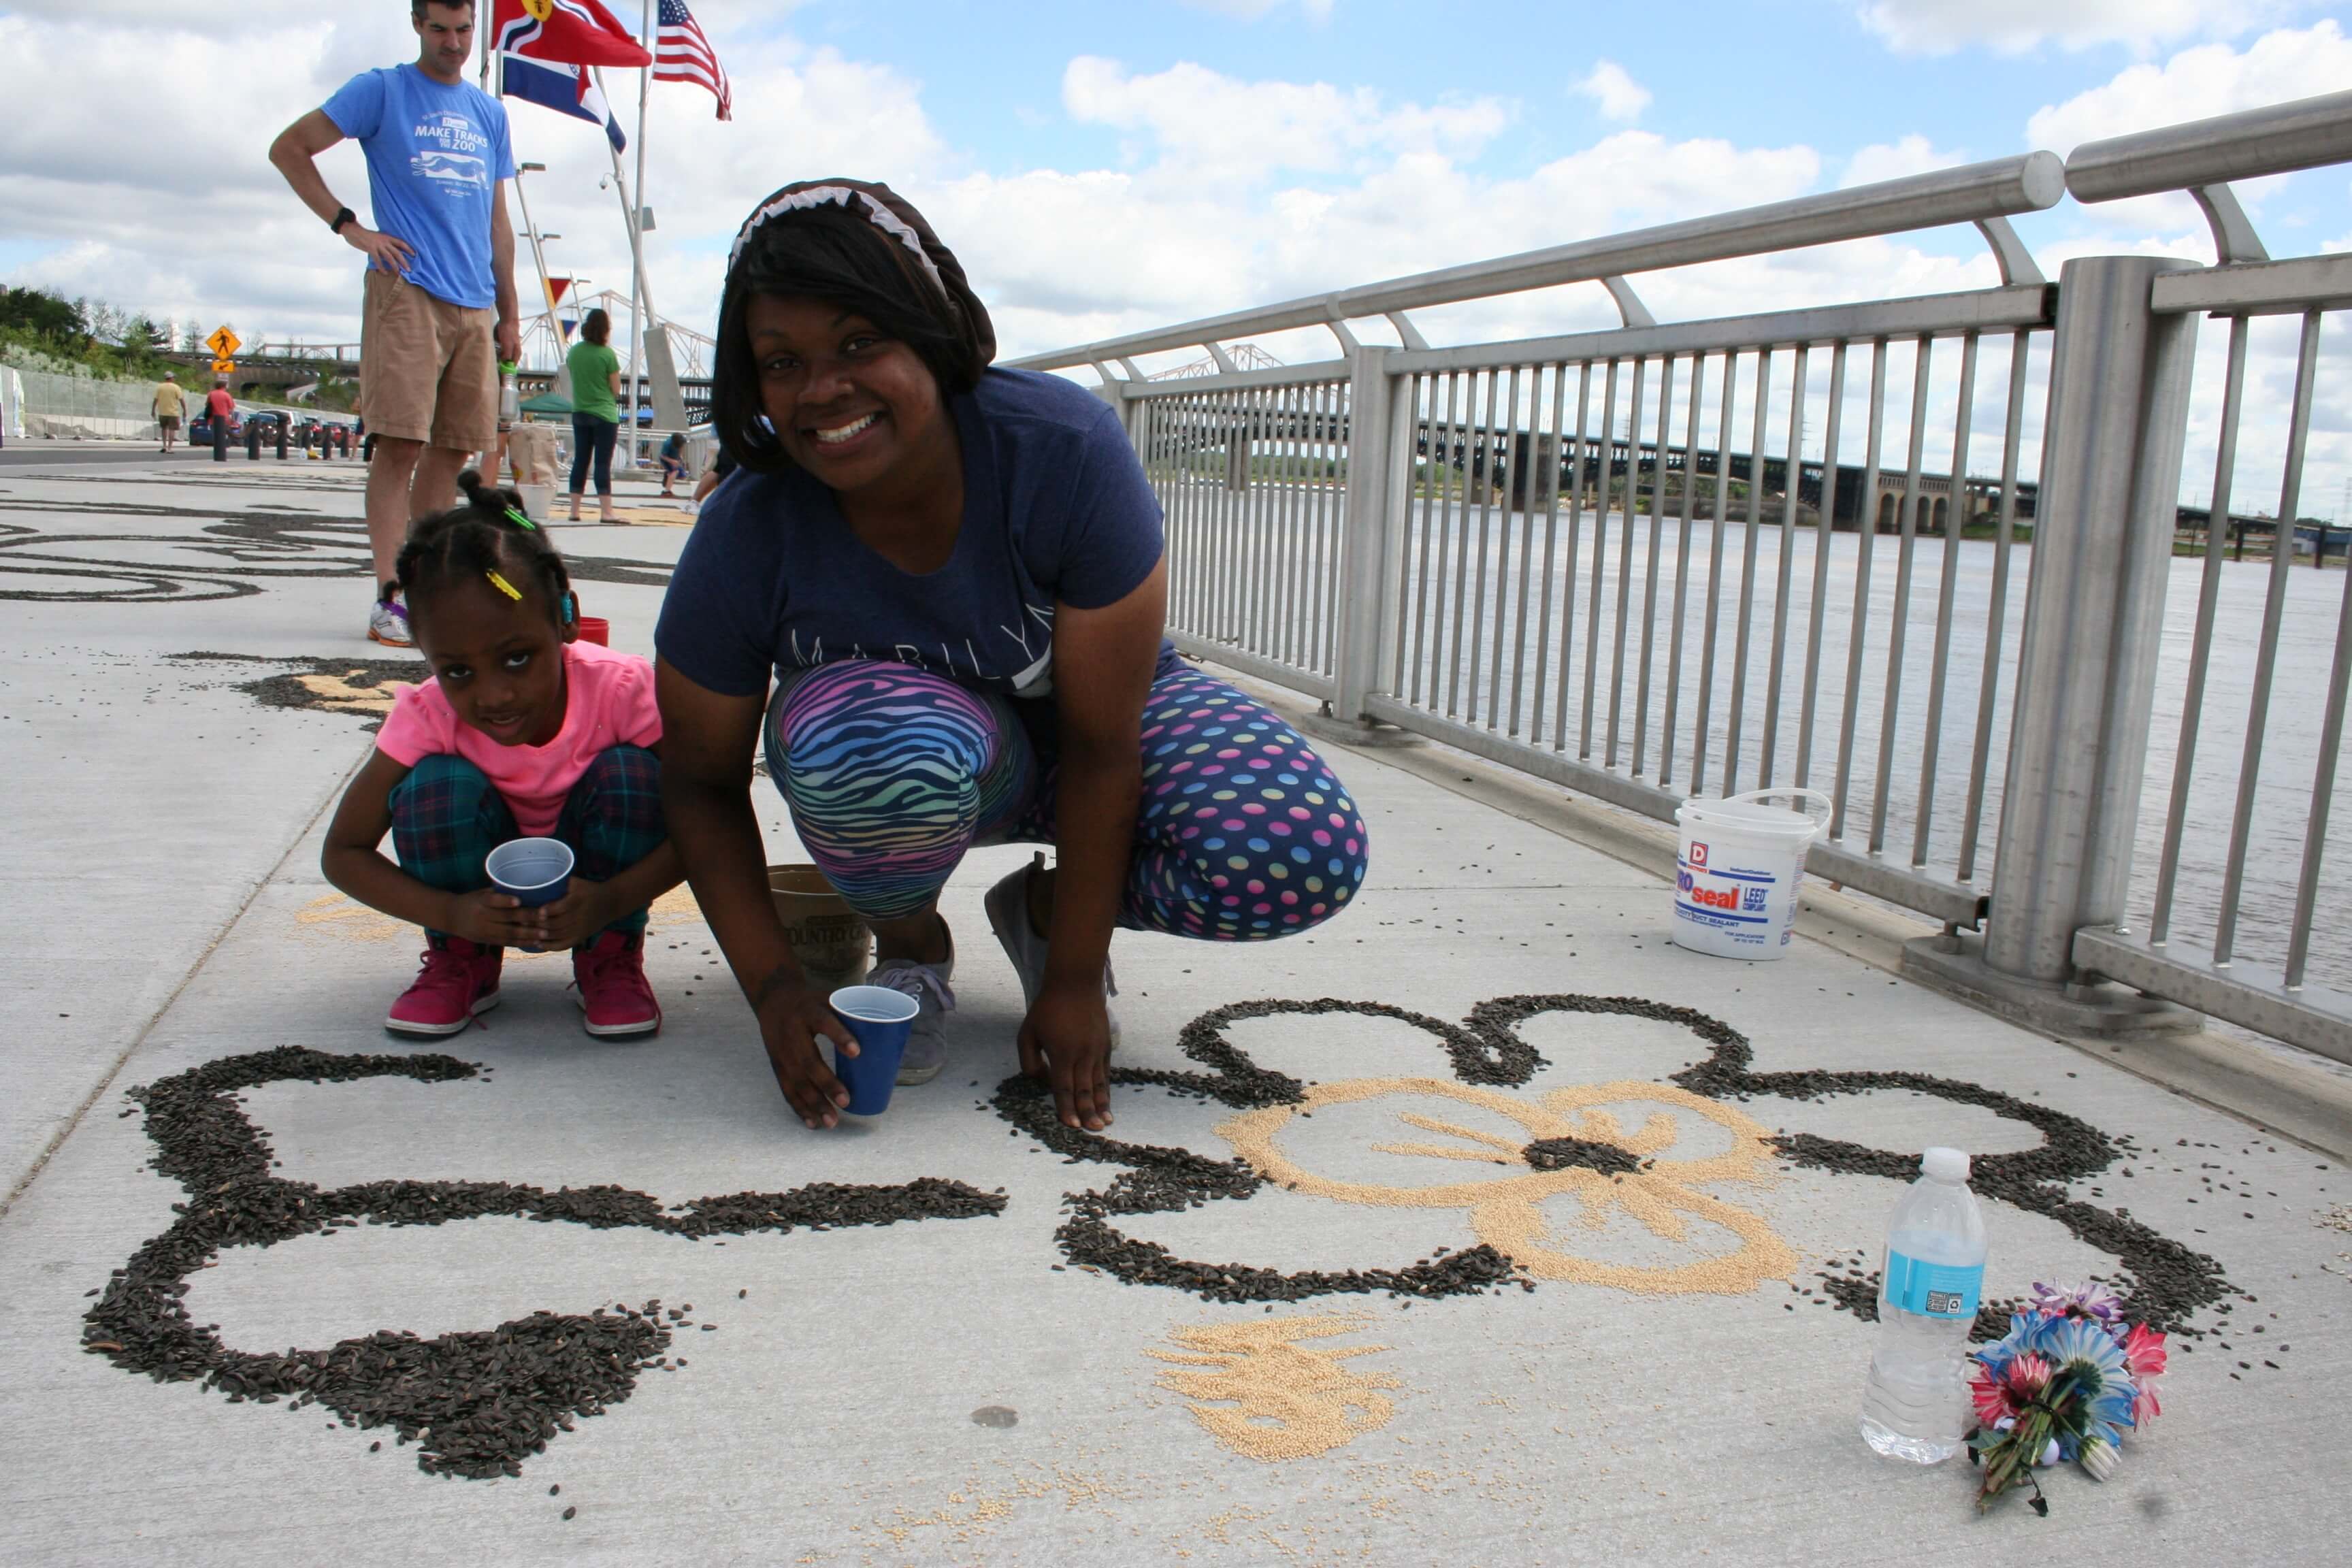 Salina Govan of St. Louis and her daughter, Kristyahna Bradshaw, help decorate the Gateway Arch riverfront with birdseed art.